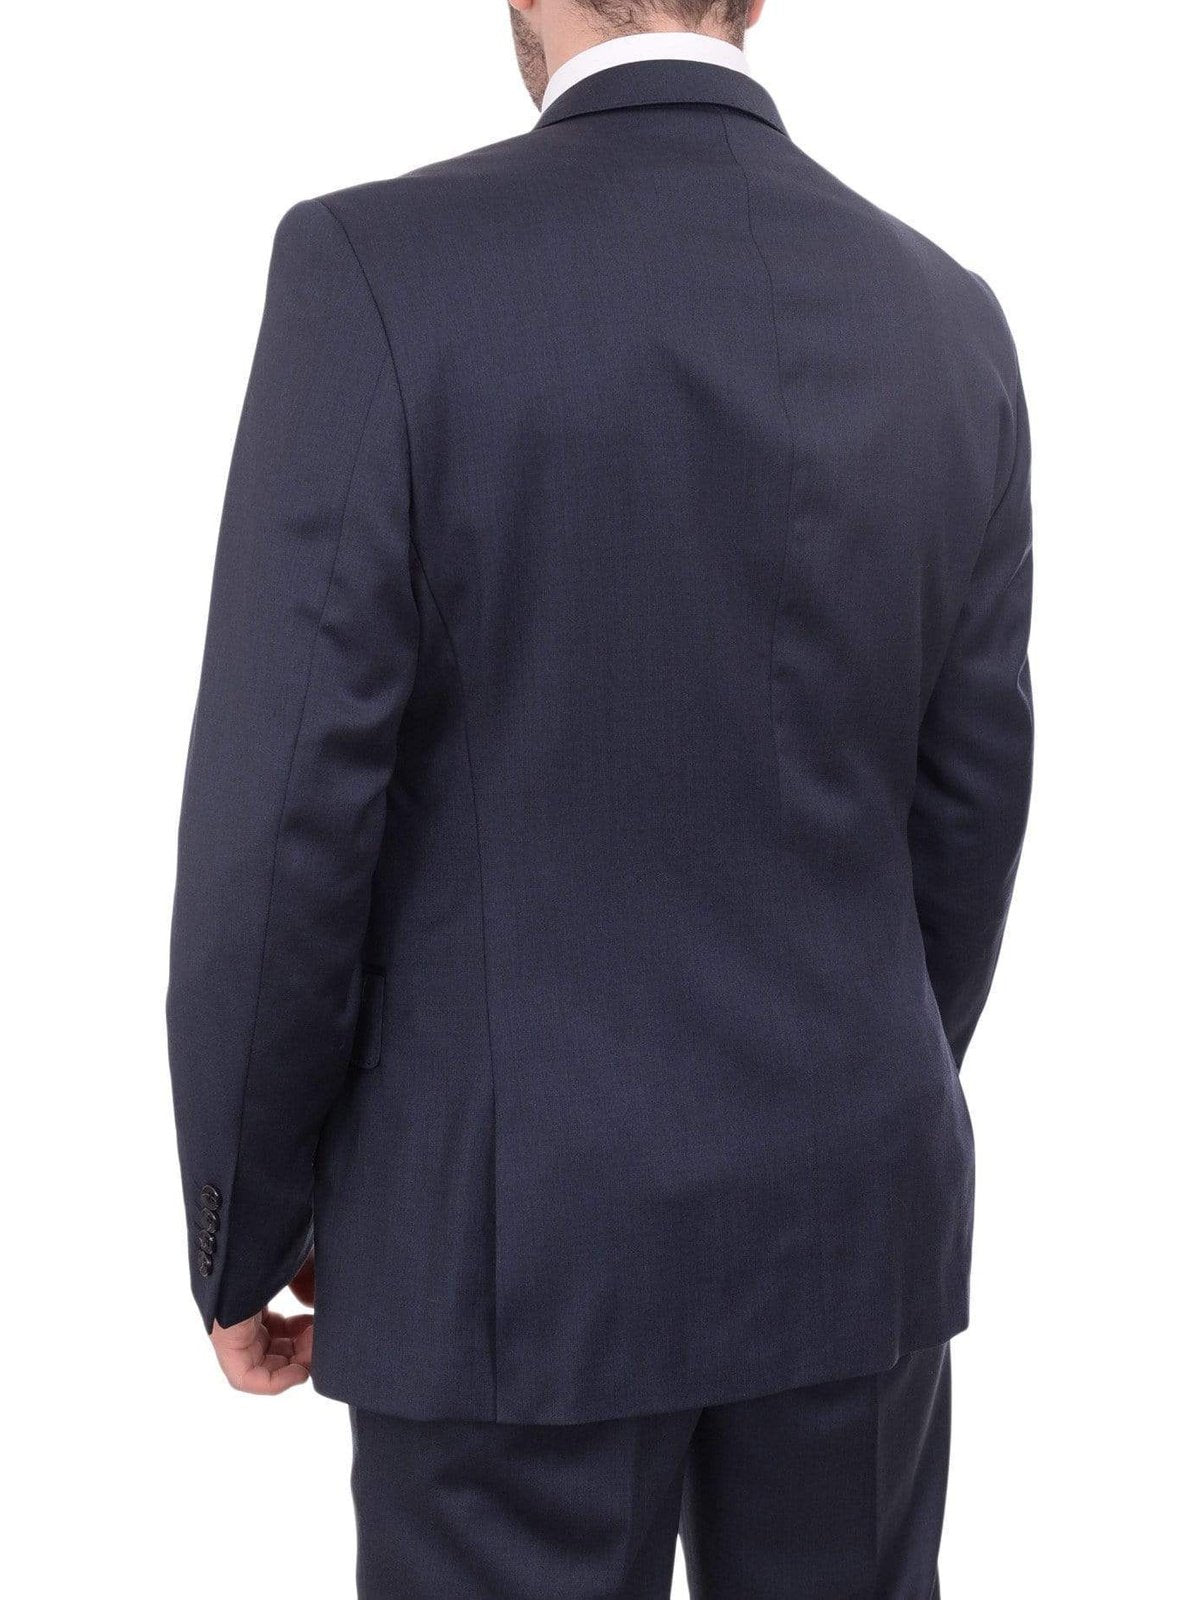 Giorgio Cosani TWO PIECE SUITS Giorgio Cosani Regular Fit Solid Navy Blue Two Button Wool Suit